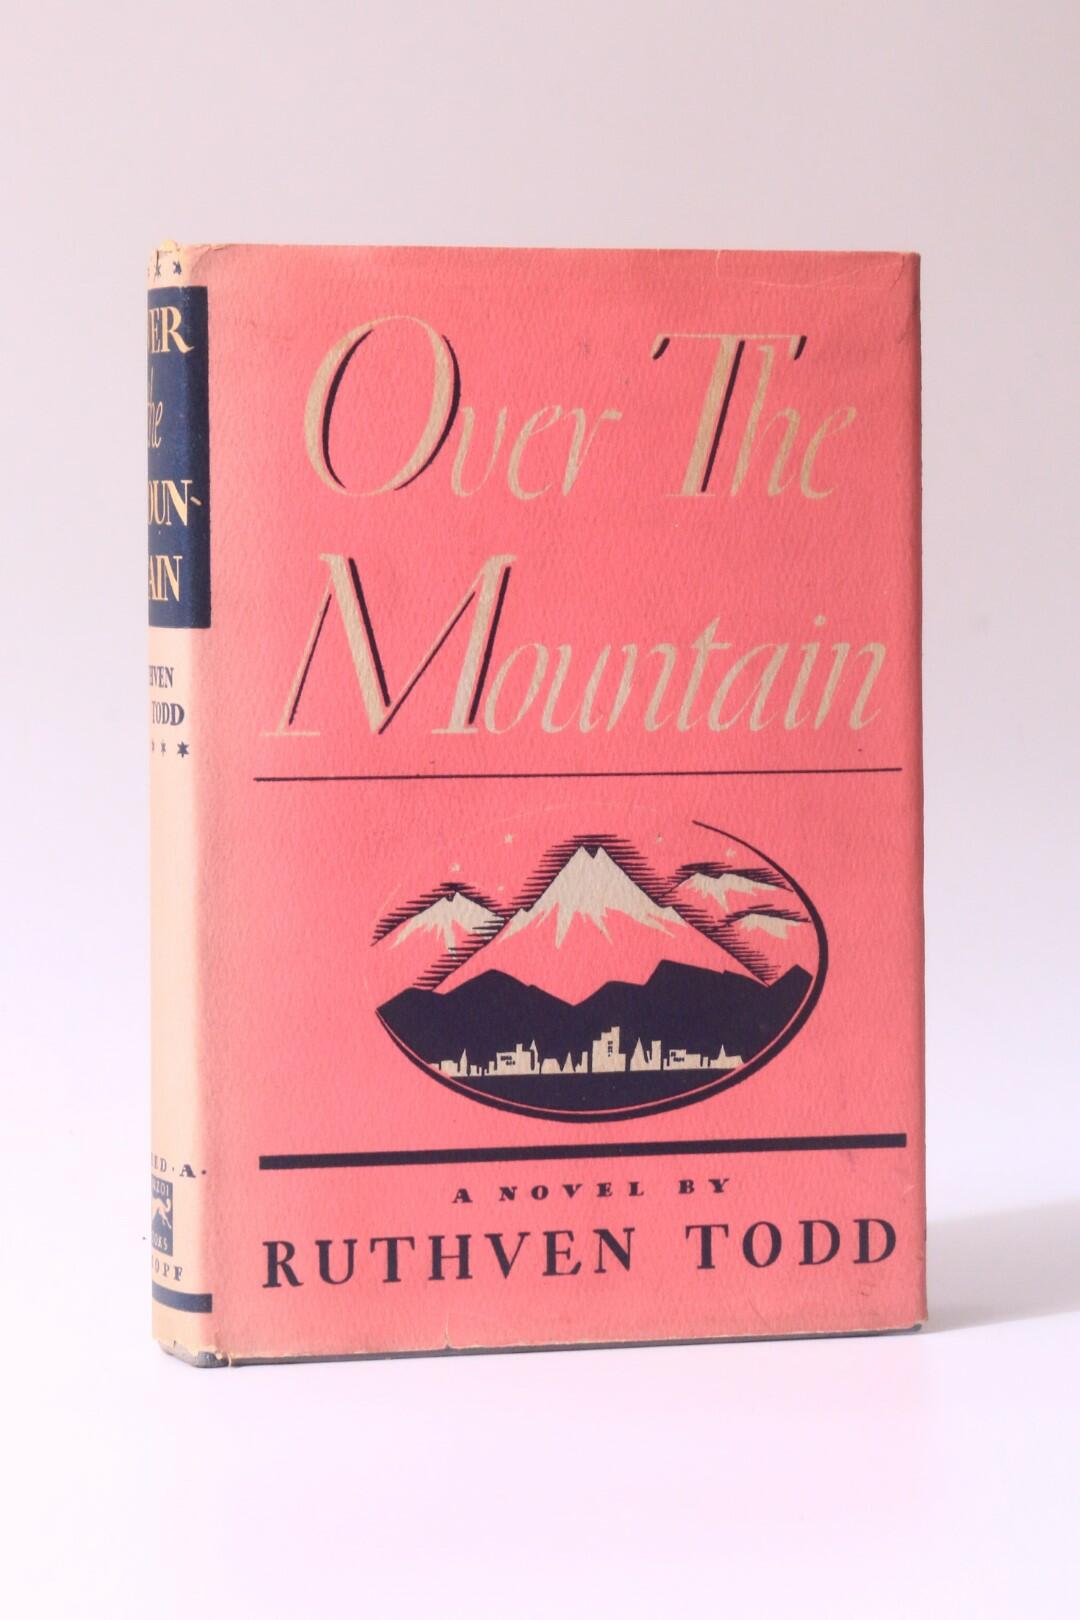 Ruthven Todd - Over the Mountain - Knopf, 1939, First Edition.